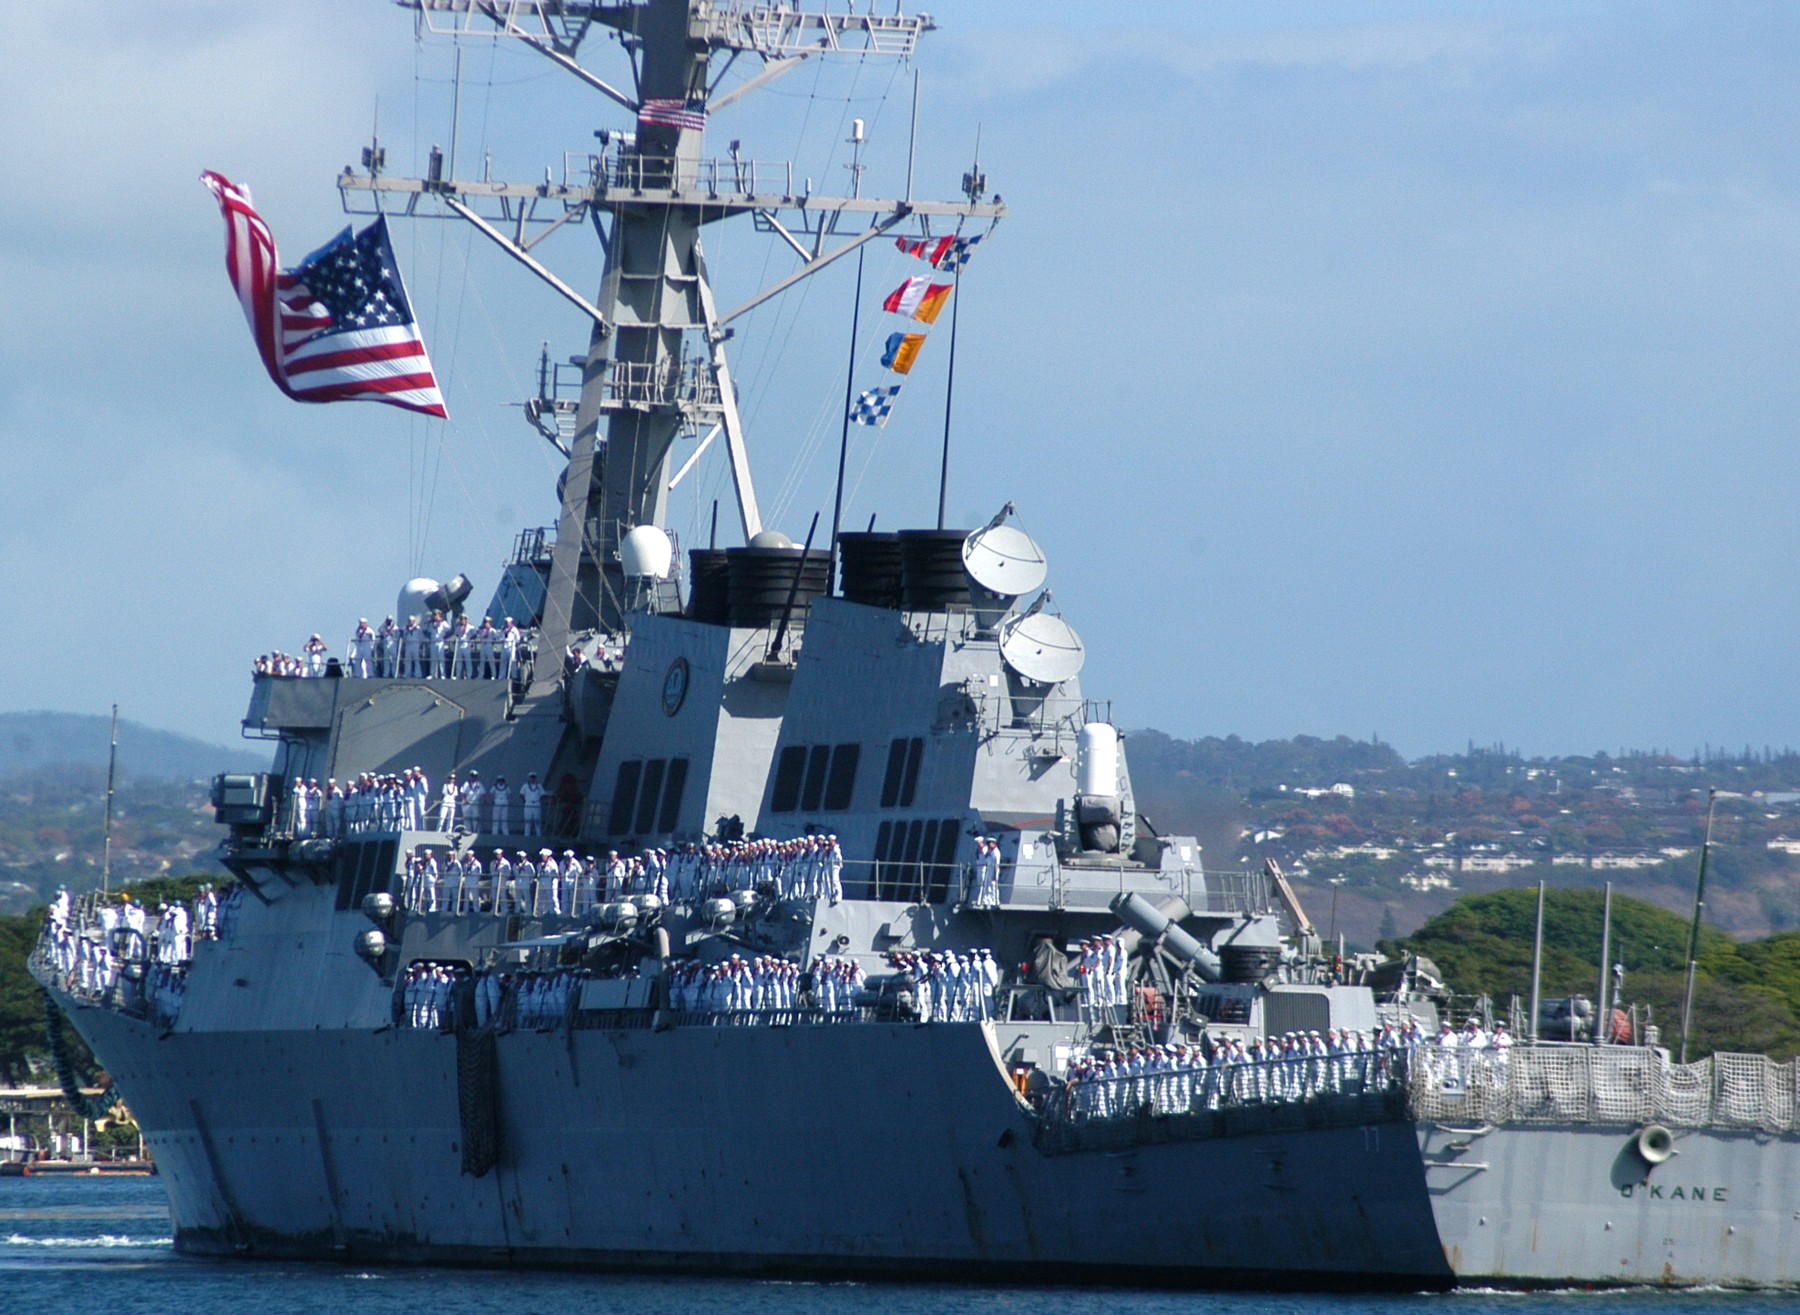 ddg-77 uss o'kane guided missile destroyer arleigh burke class navy aegis 56 naval station pearl harbor hawaii